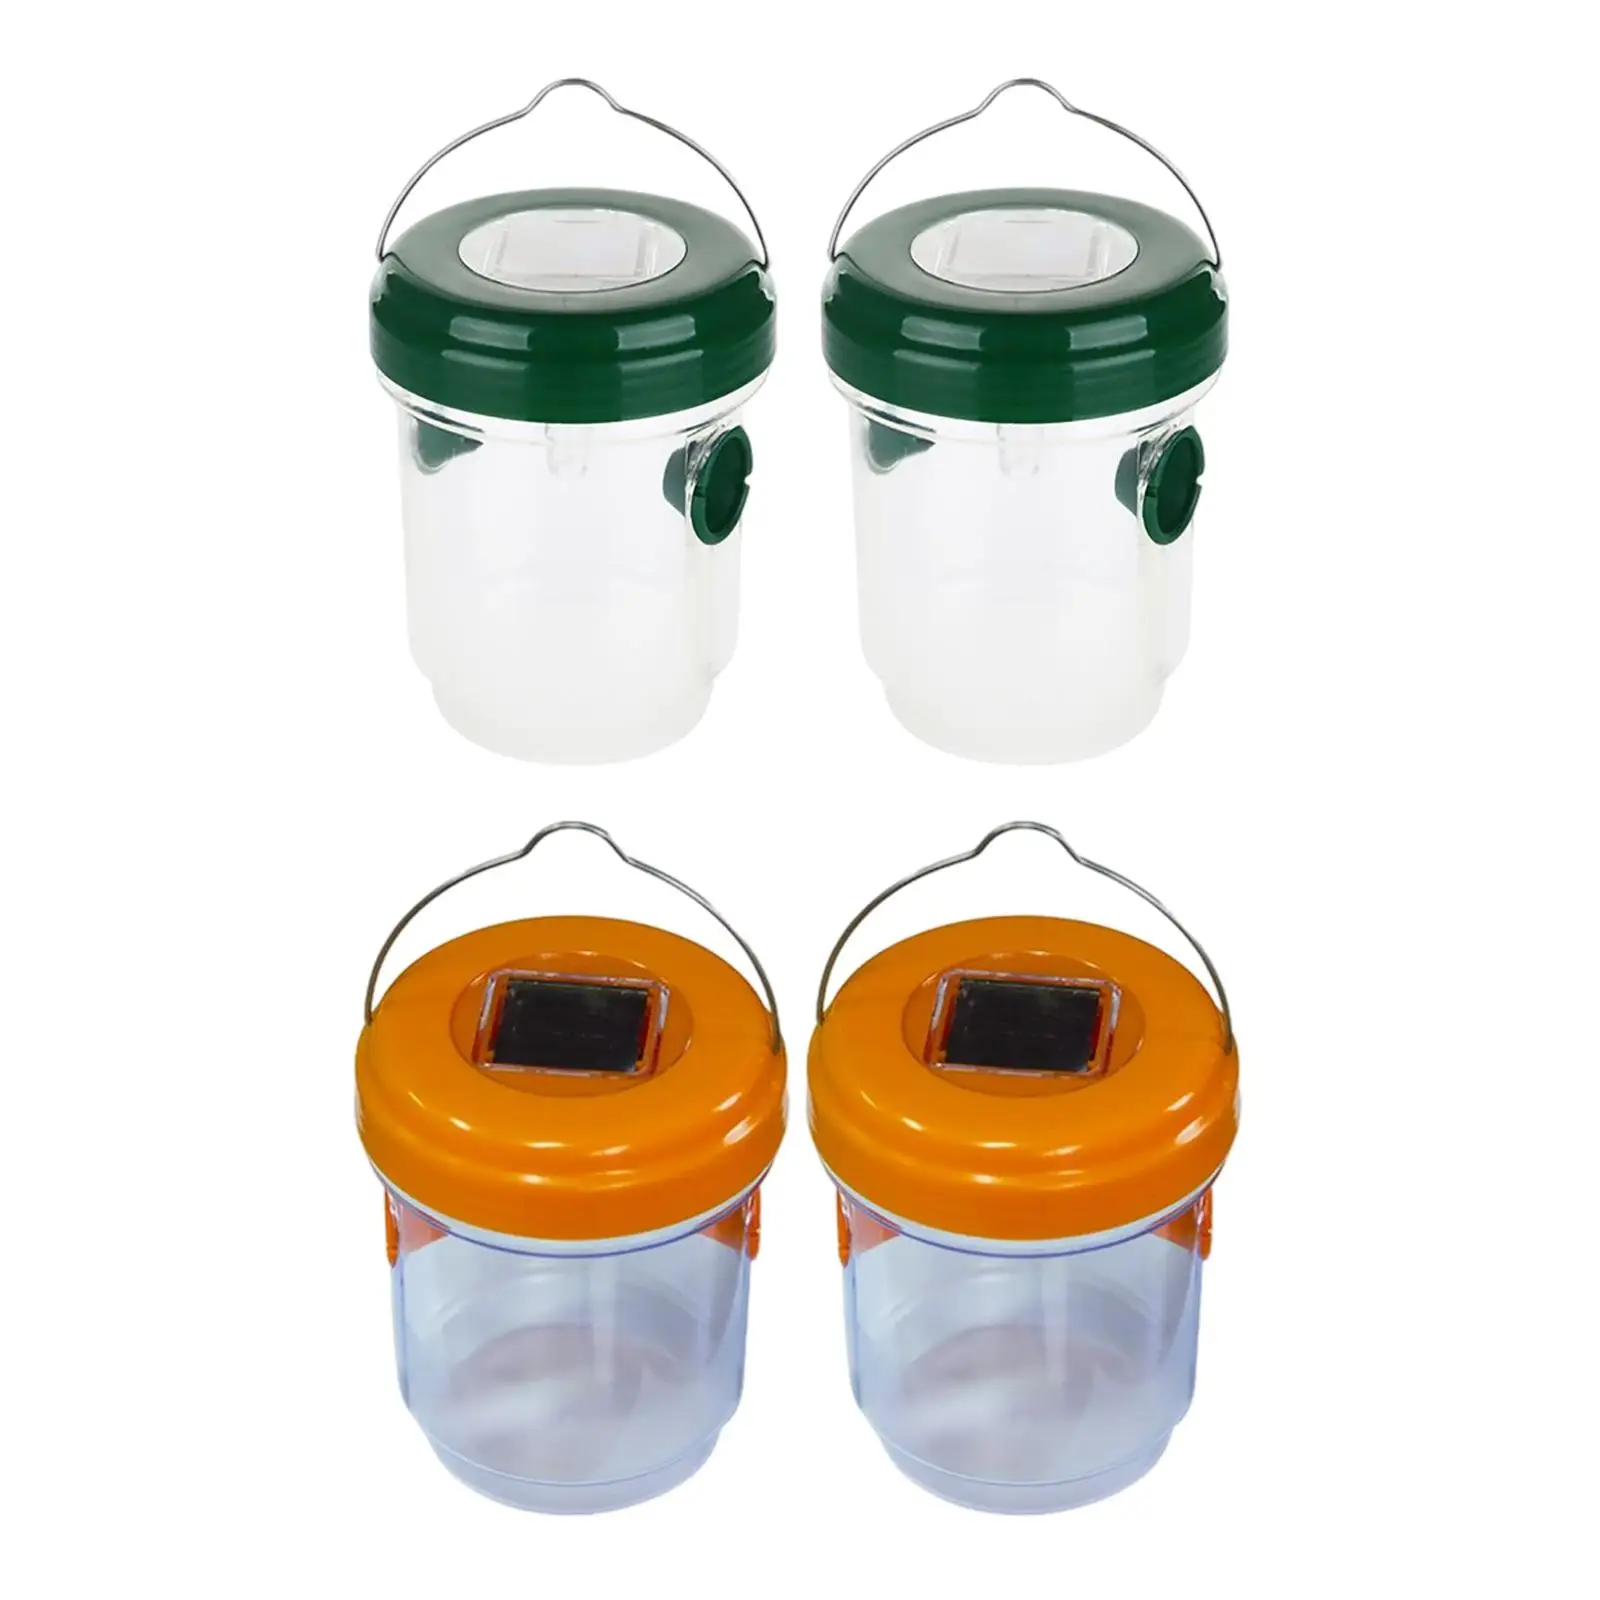 2x Solar Wasp Killer Fly Trap Reusable Fruit Fly Bee Trap Insect Catching Lamp Hanging Wasp Trap Catcher for Outdoor Garden